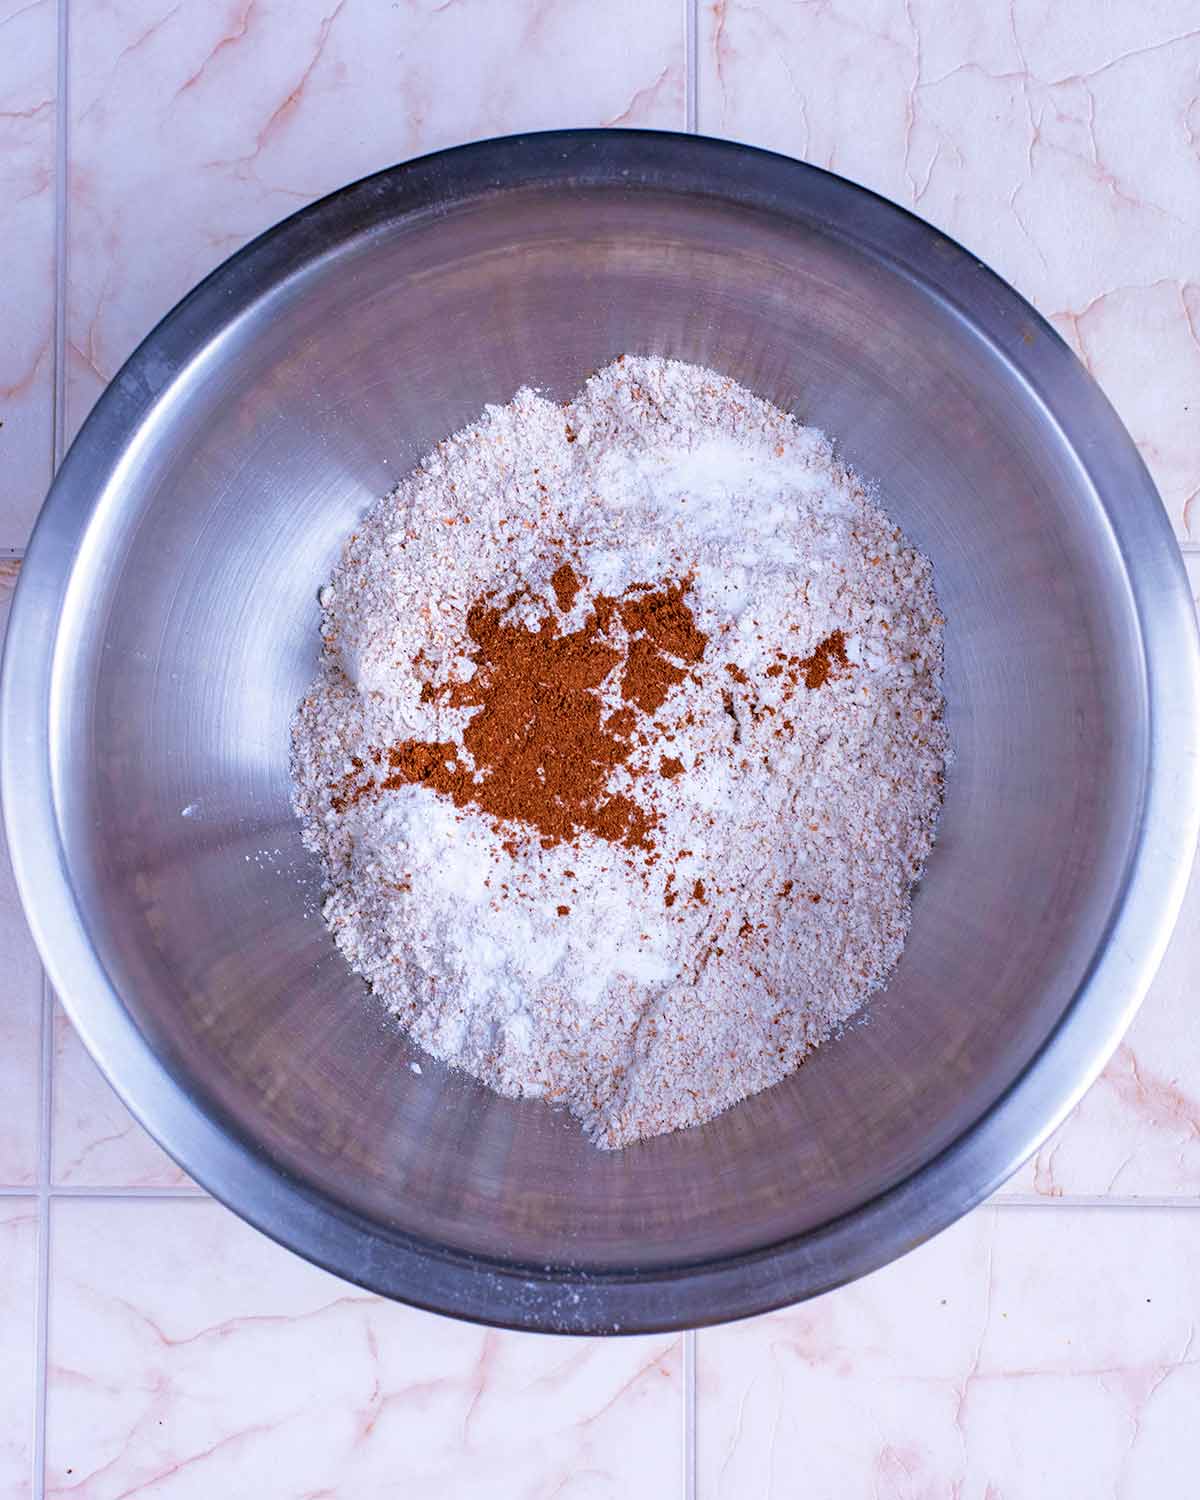 Flour, cinnamon, sweetener and baking powder in a mixing bowl.